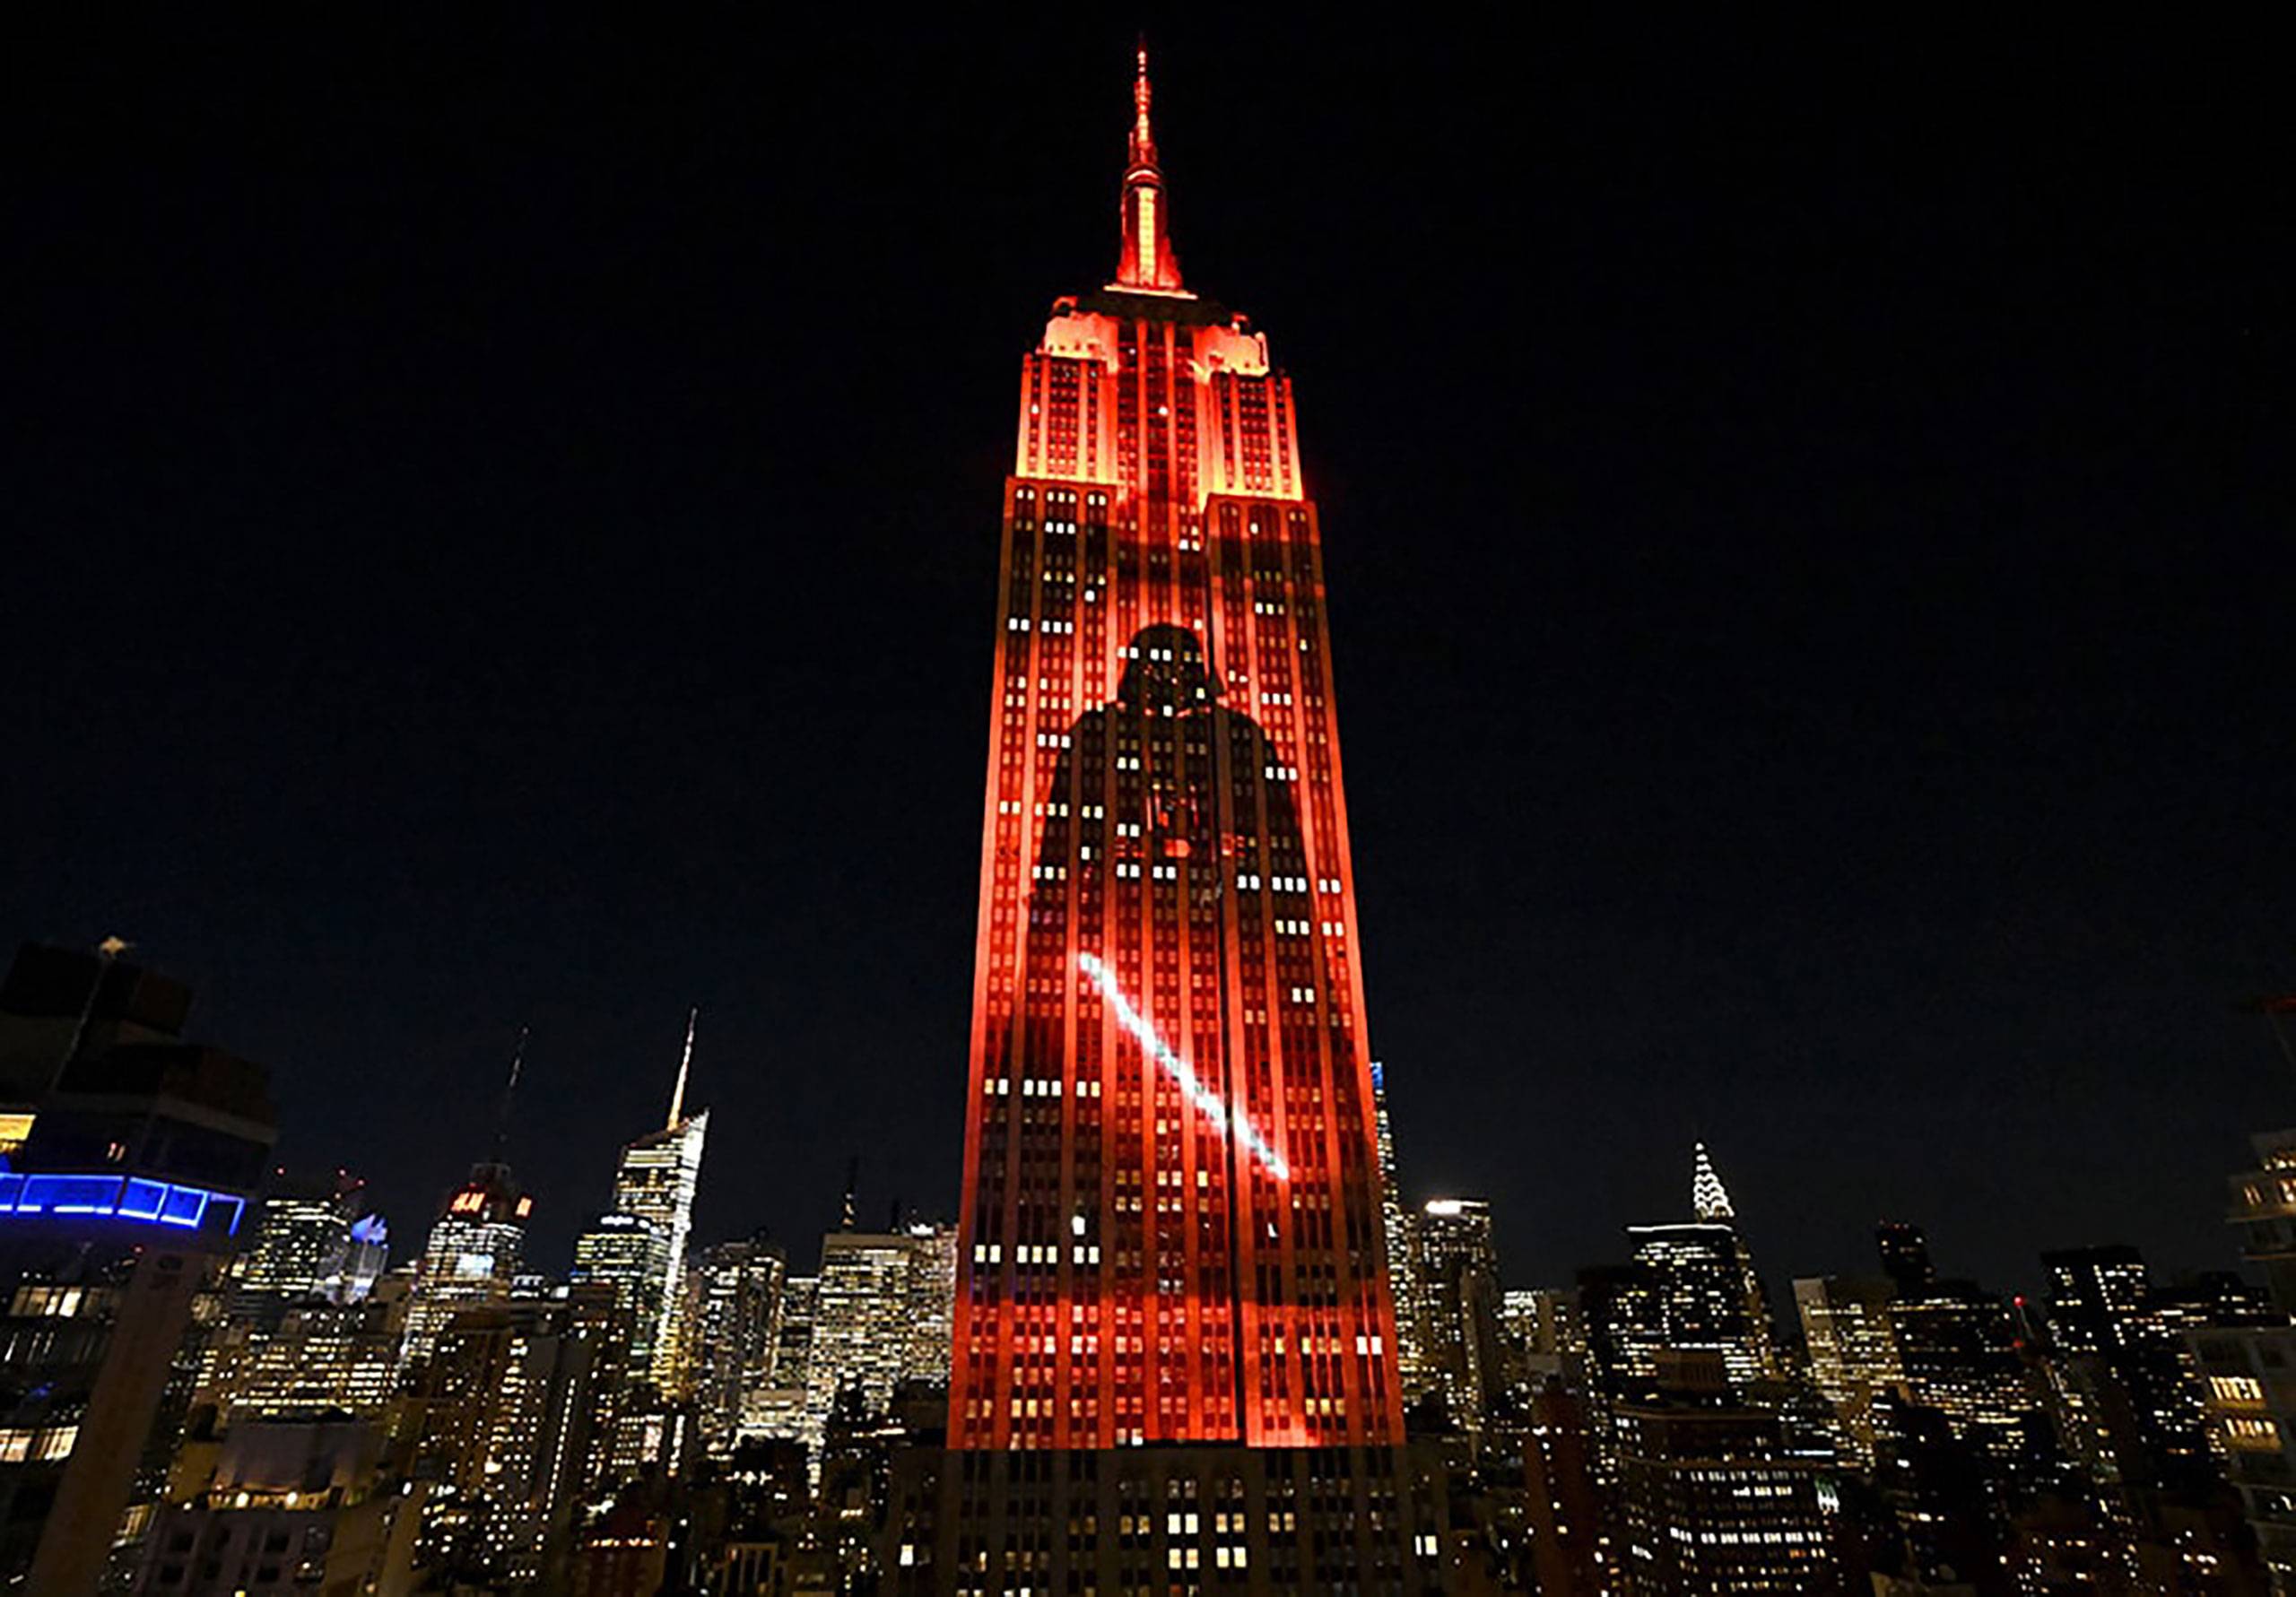 Star Wars Empire State Building takeover